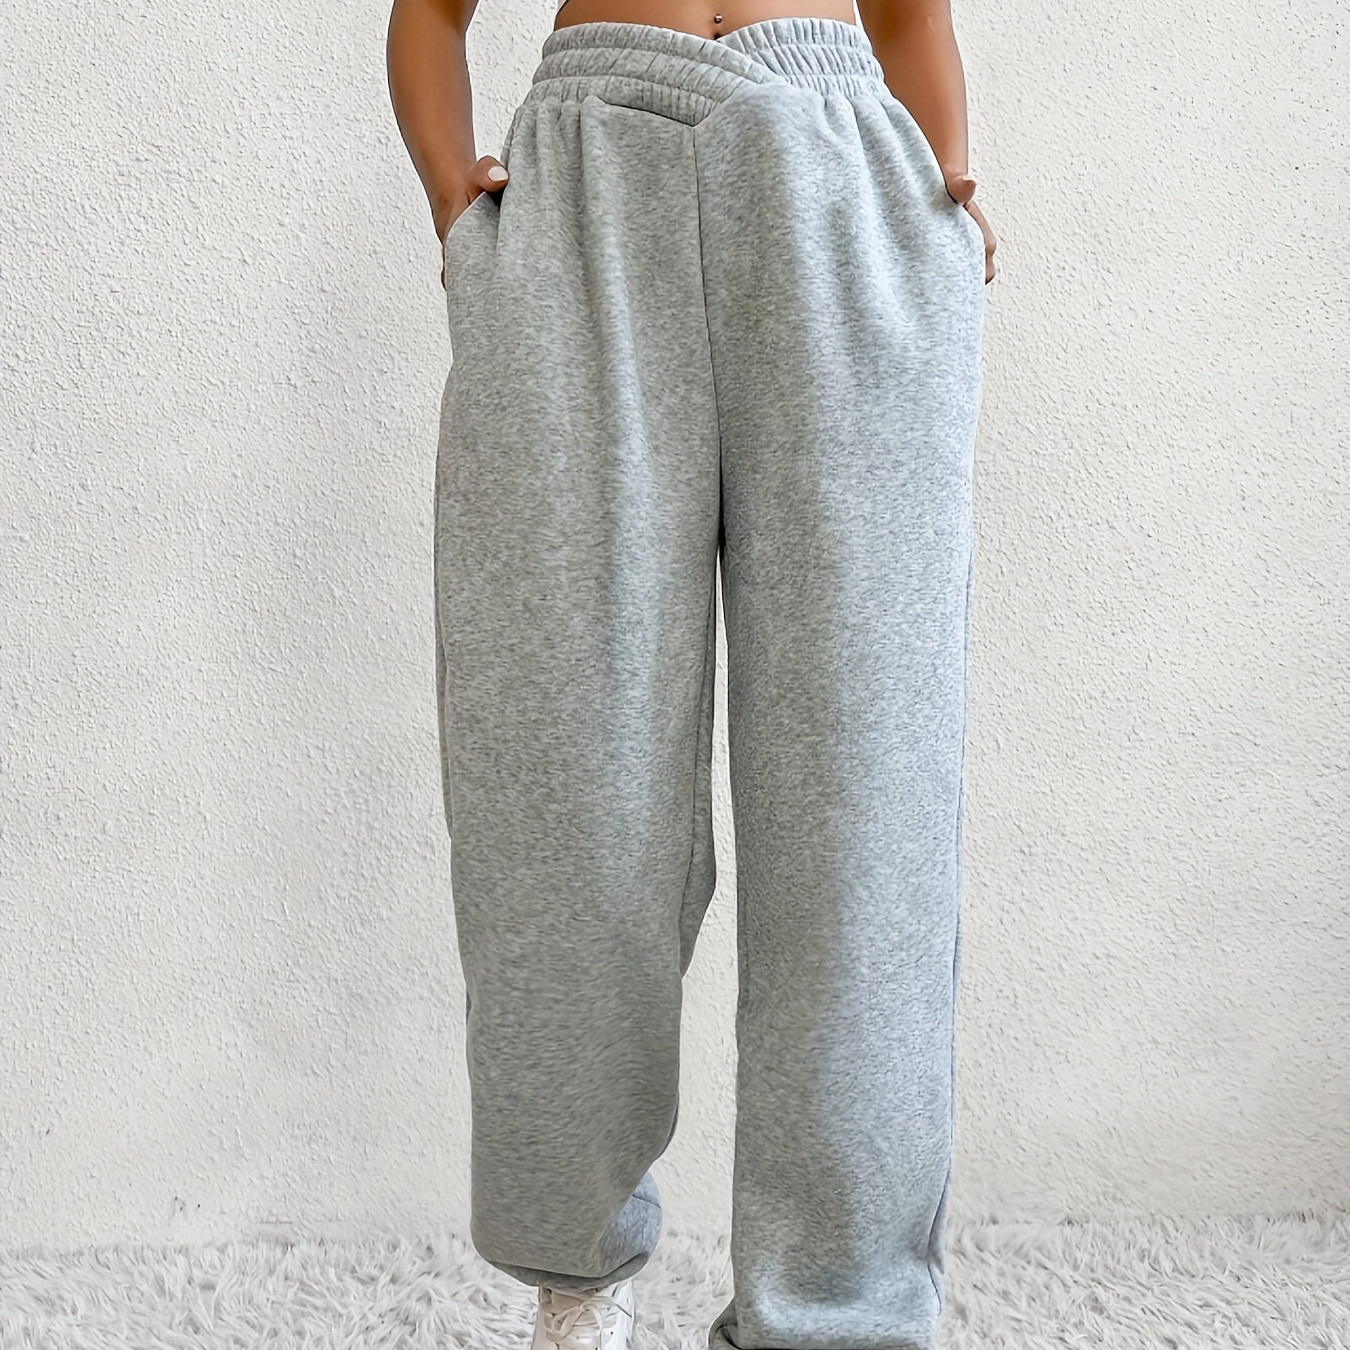 

Solid Loose Basic Jogger Sweatpants, Versatile Comfy Pants For Fall & Winter, Women's Clothing